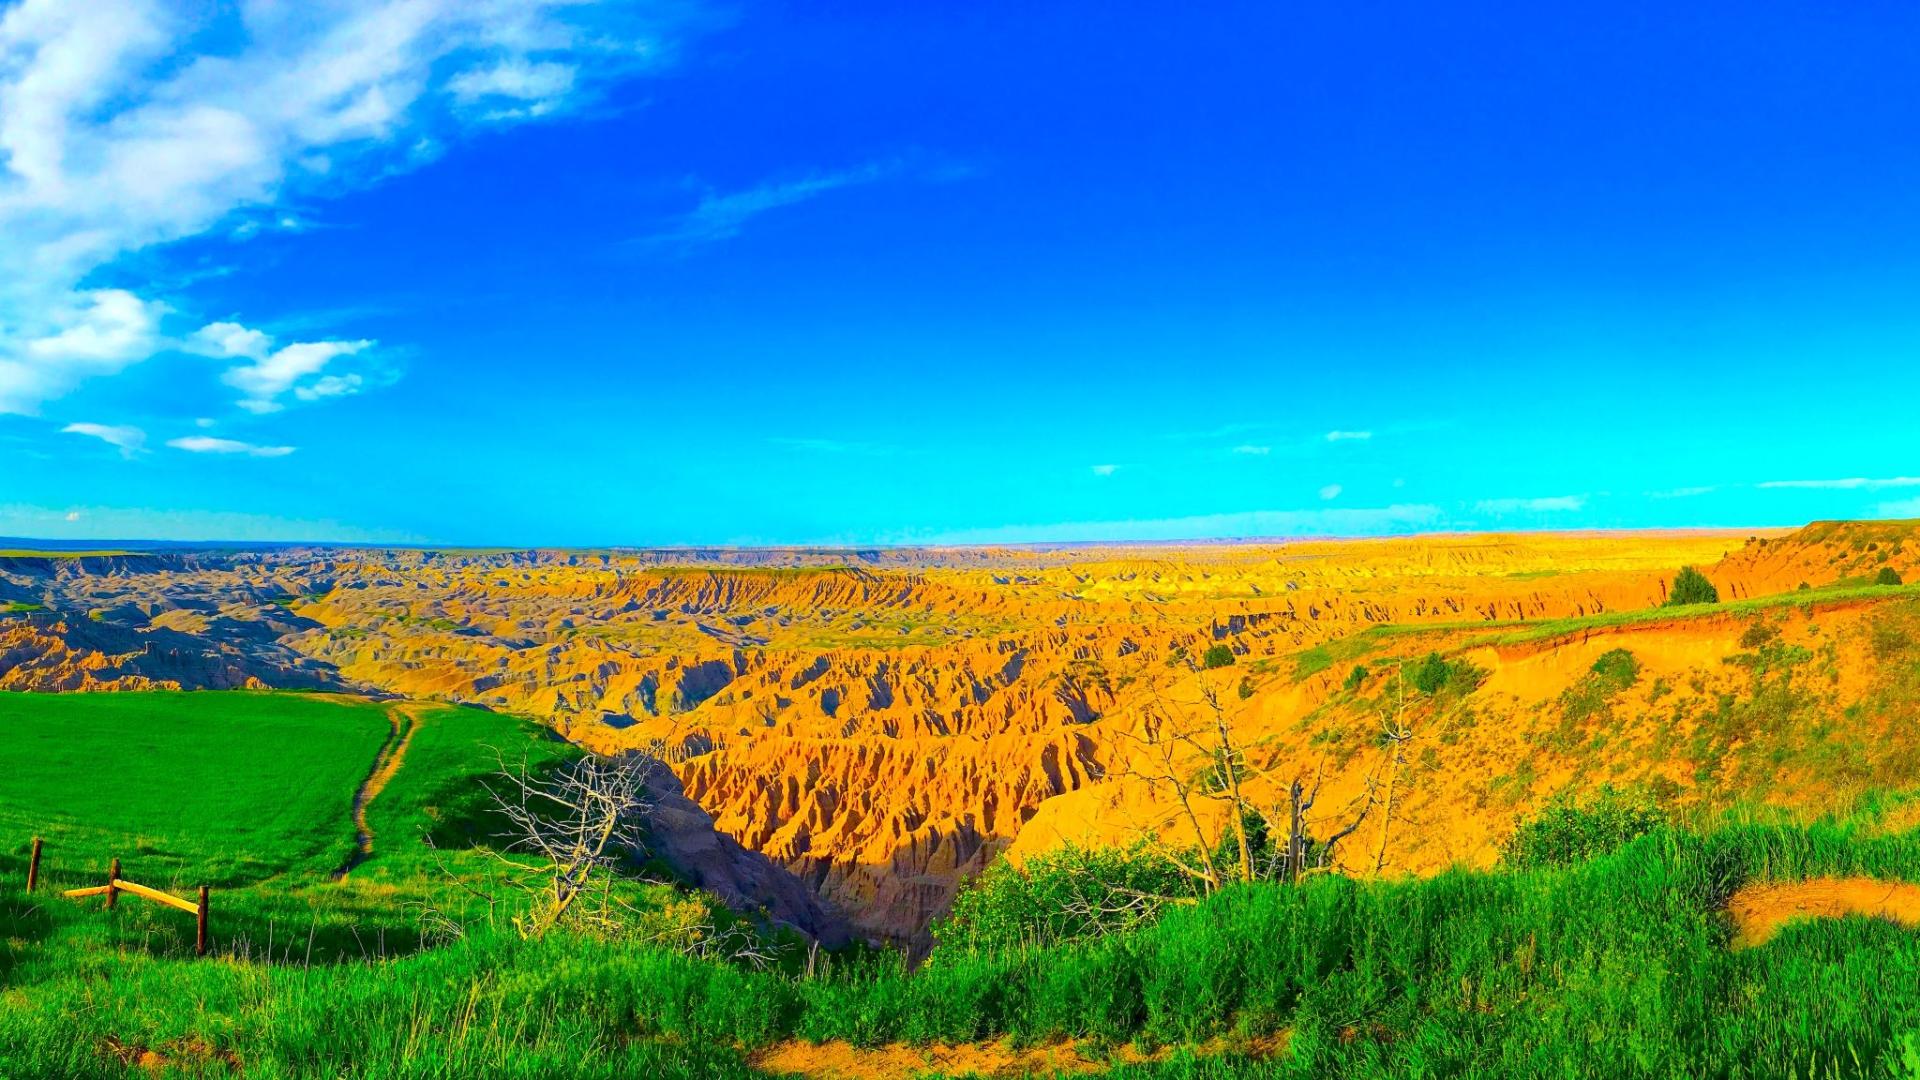 Image of a green and gold landscape against a bright blue sky.